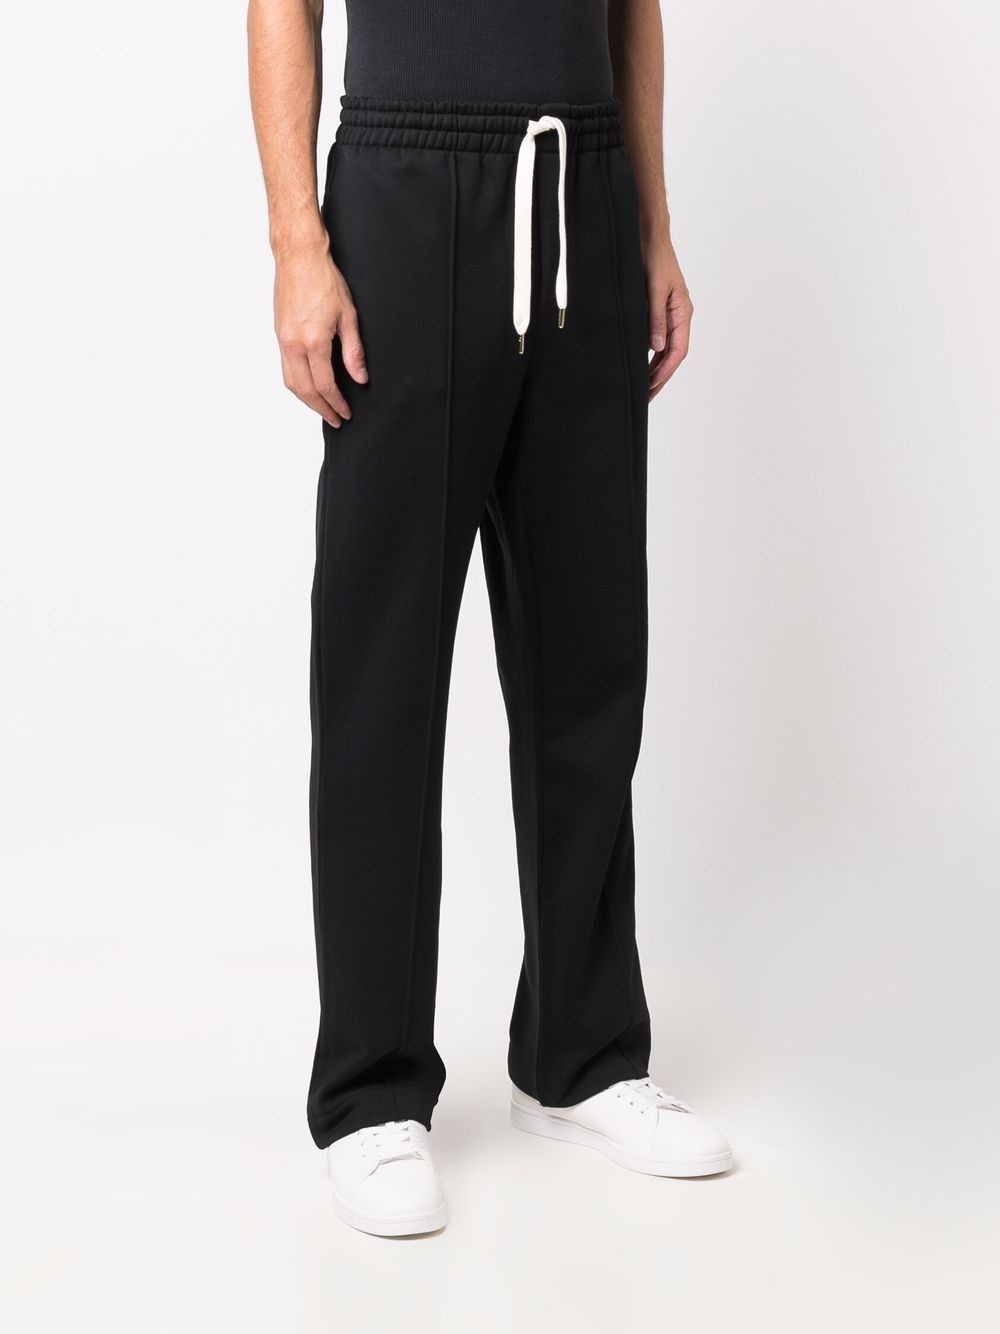 embroidered-logo striped joggers - 3